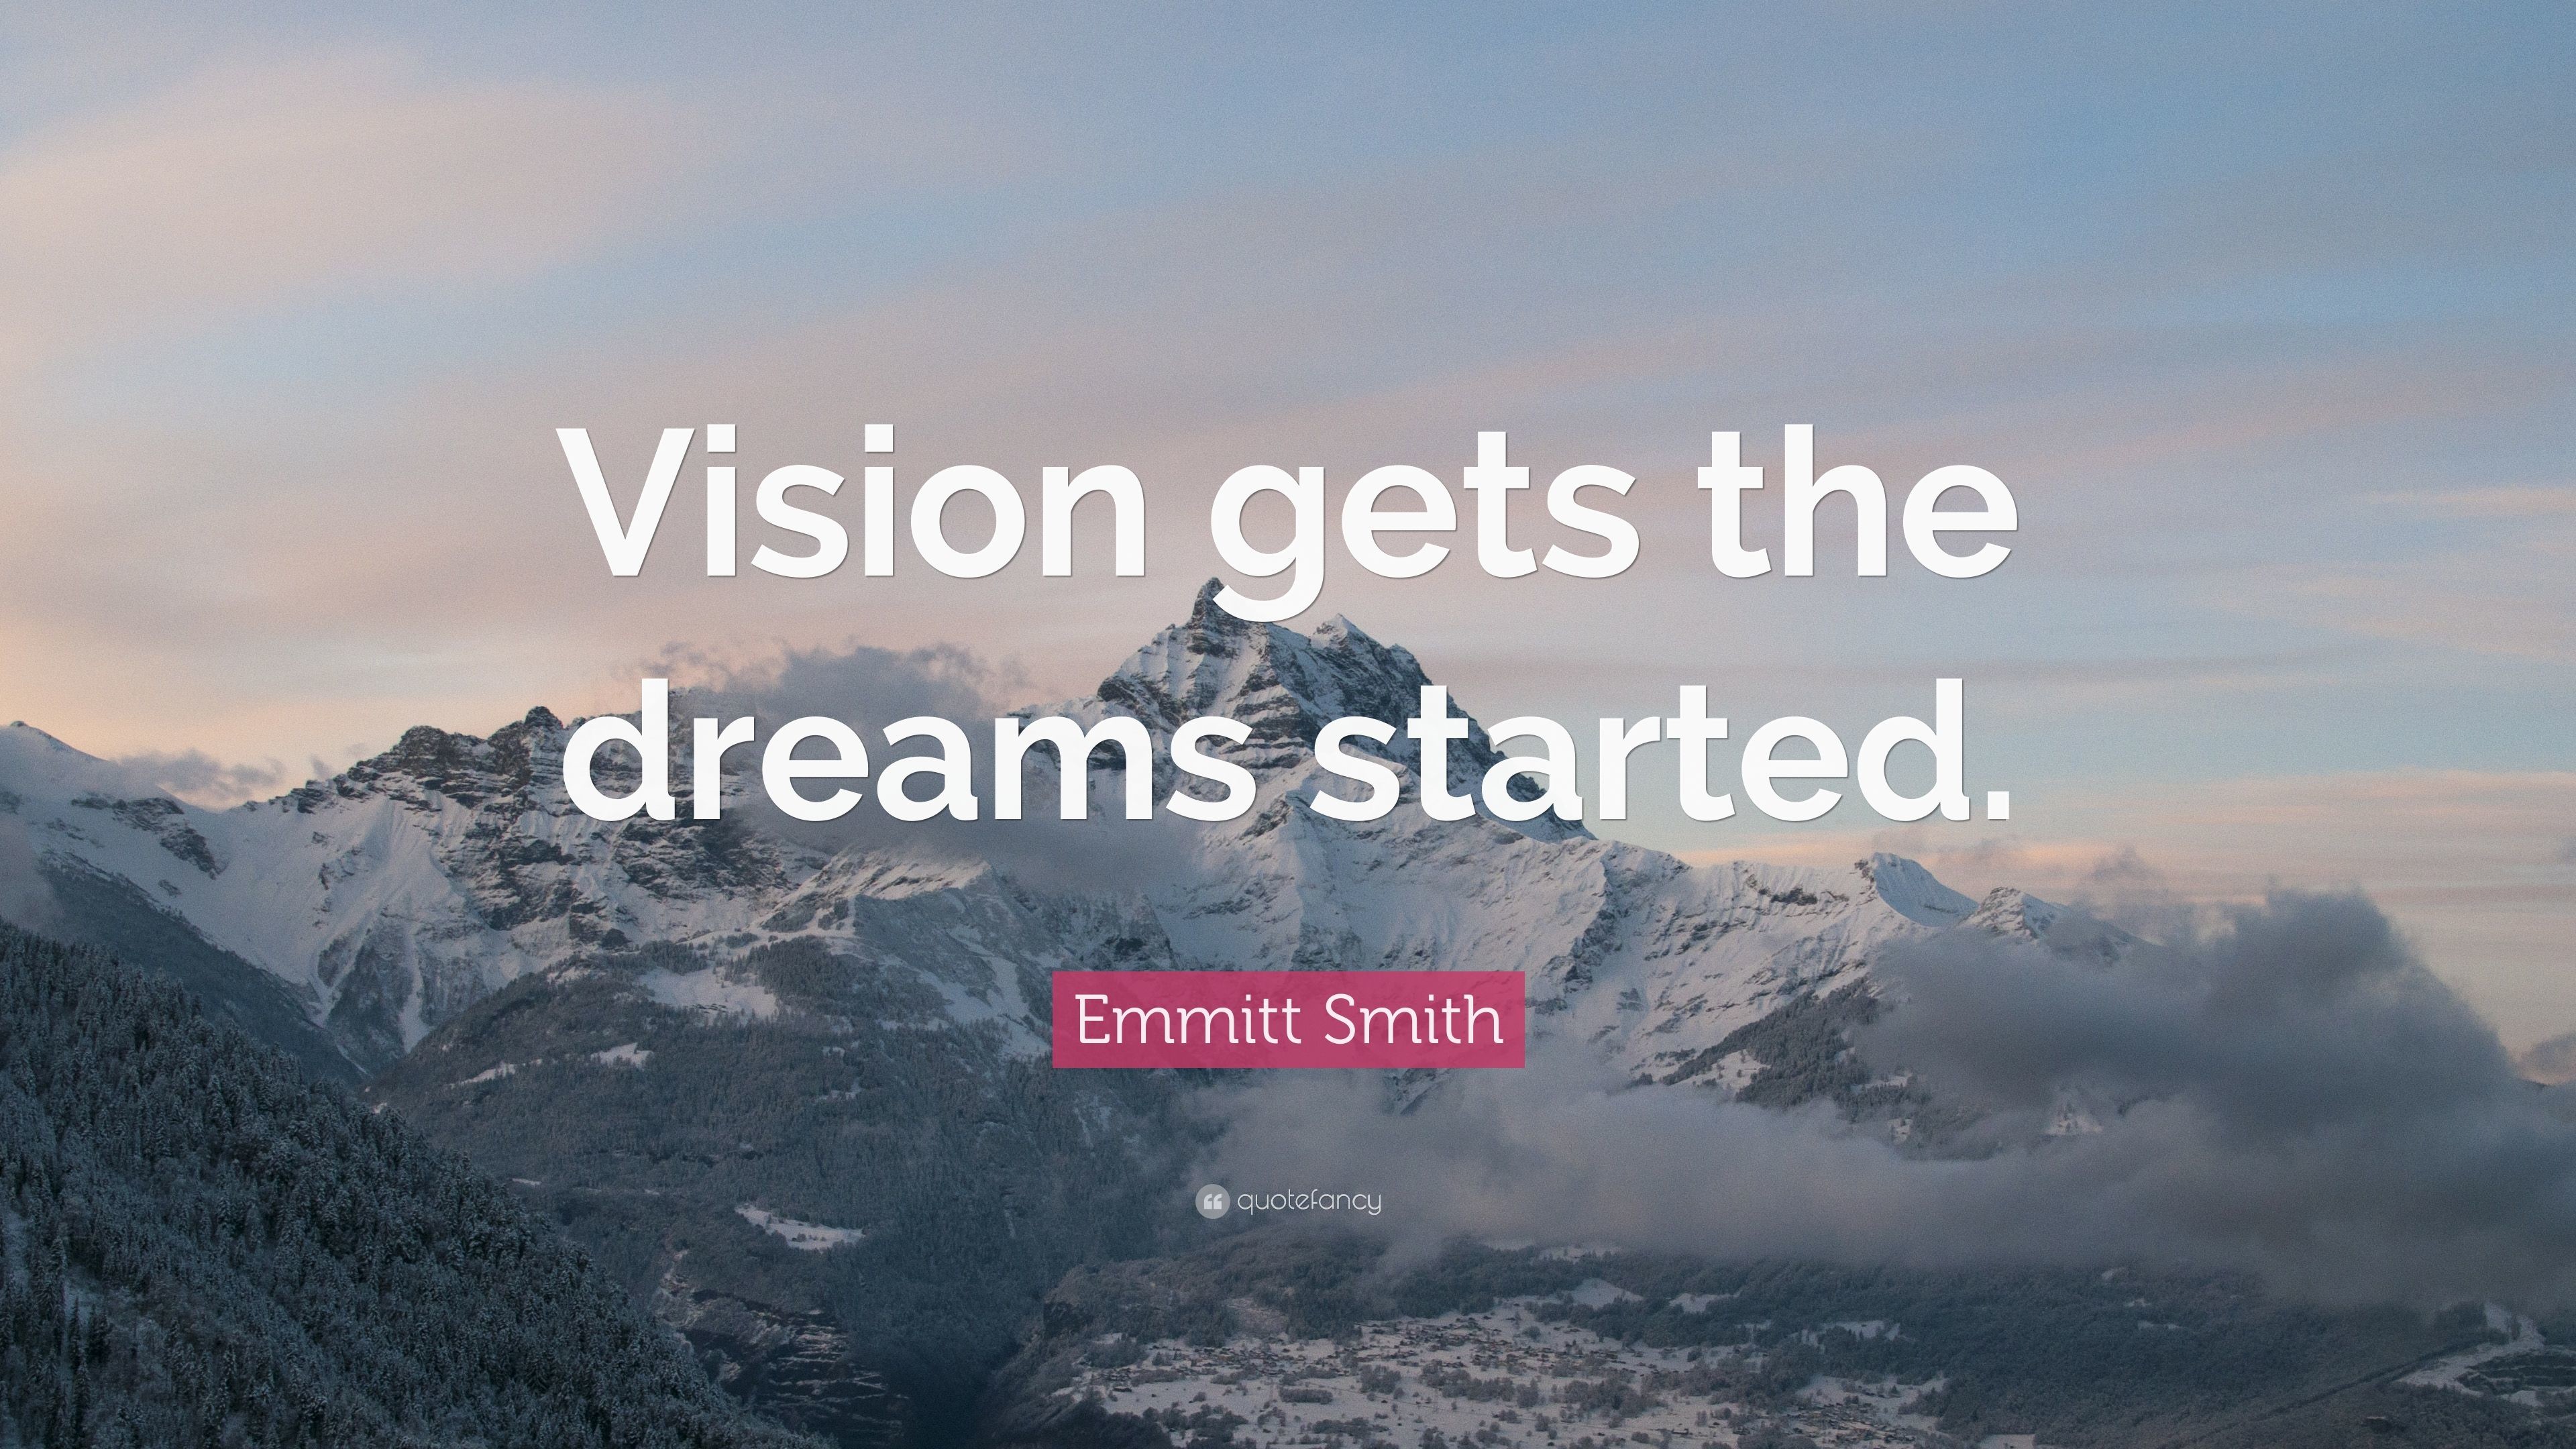 3840x2160 Emmitt Smith Quote: “Vision gets the dreams started.”